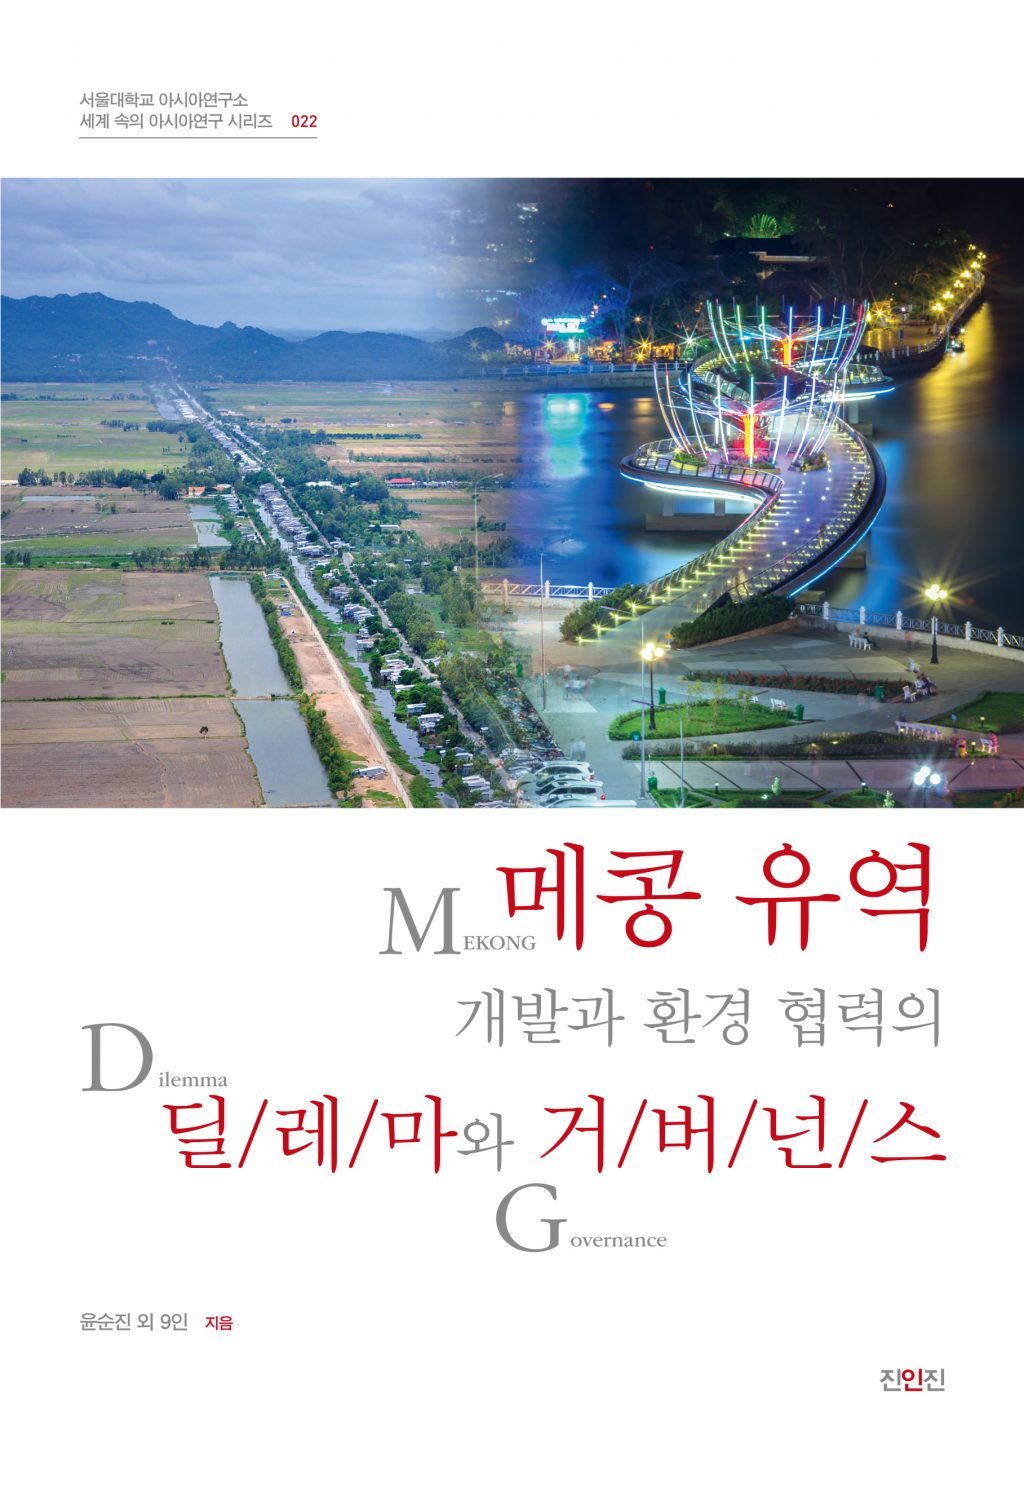 The Dilemma and Governance of Mekong Region Development and Environmental Cooperation